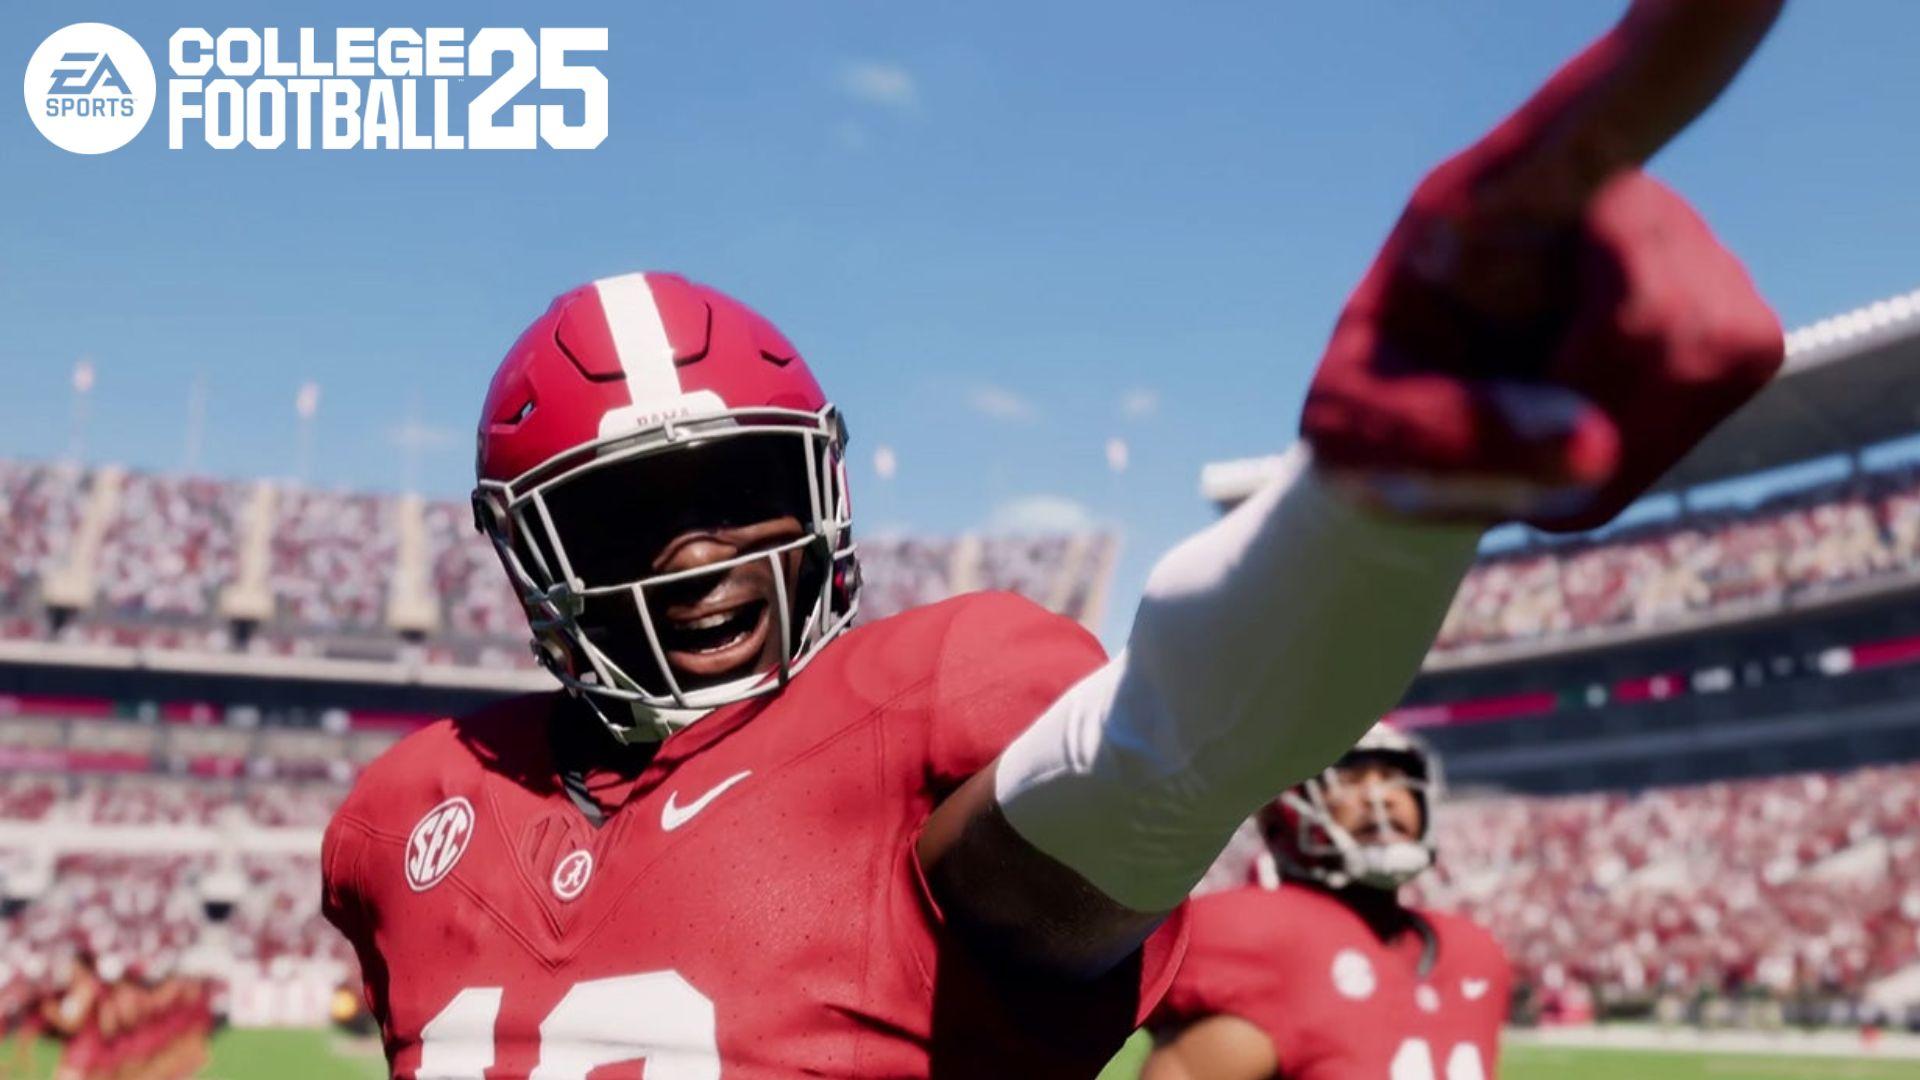 Alabama player pointing to crowd in EA SPORTS College Football 25